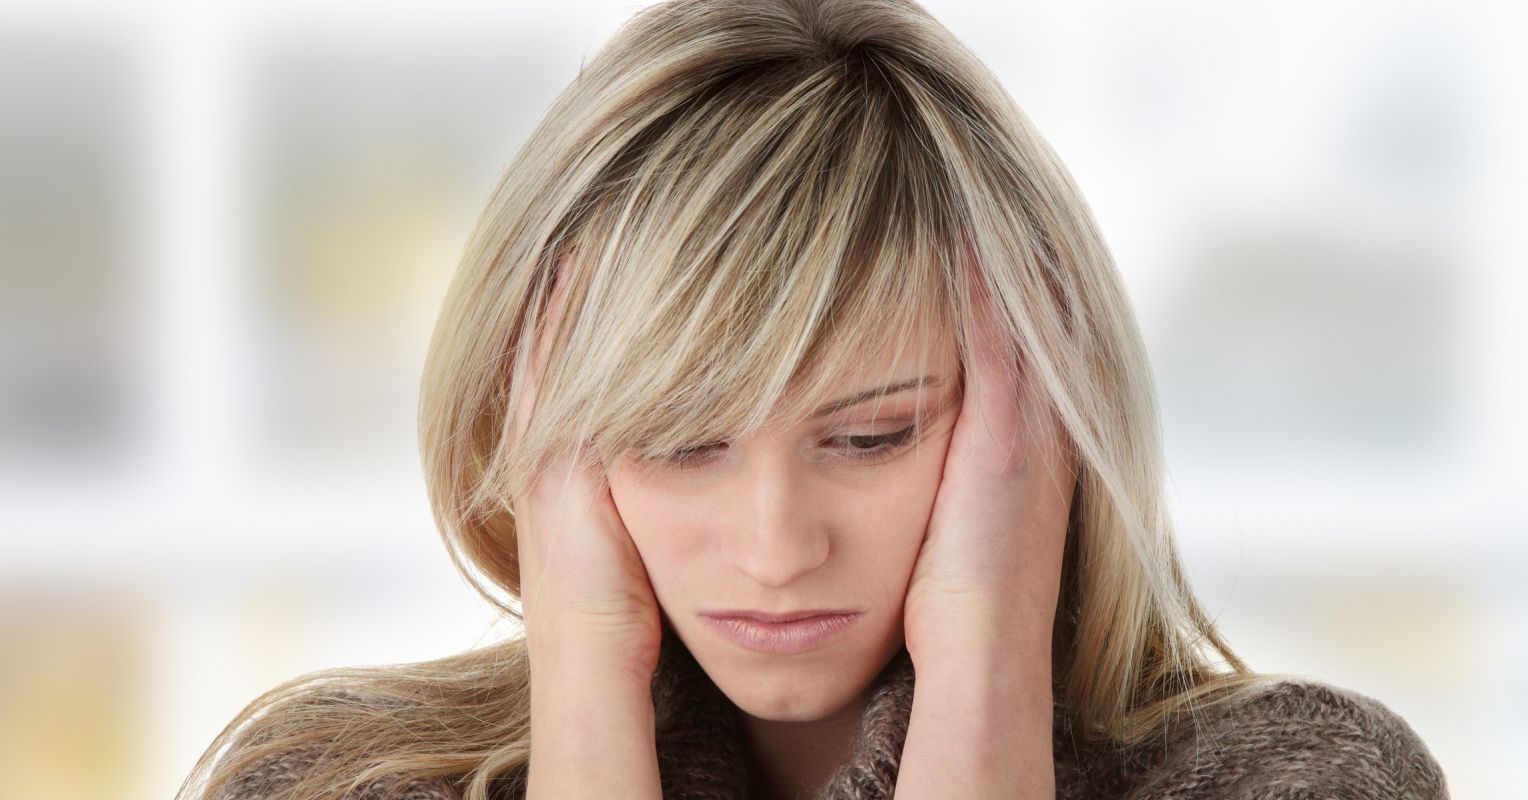 Anxiety Treatment: Should You Be Wary of Anxiety Medication?